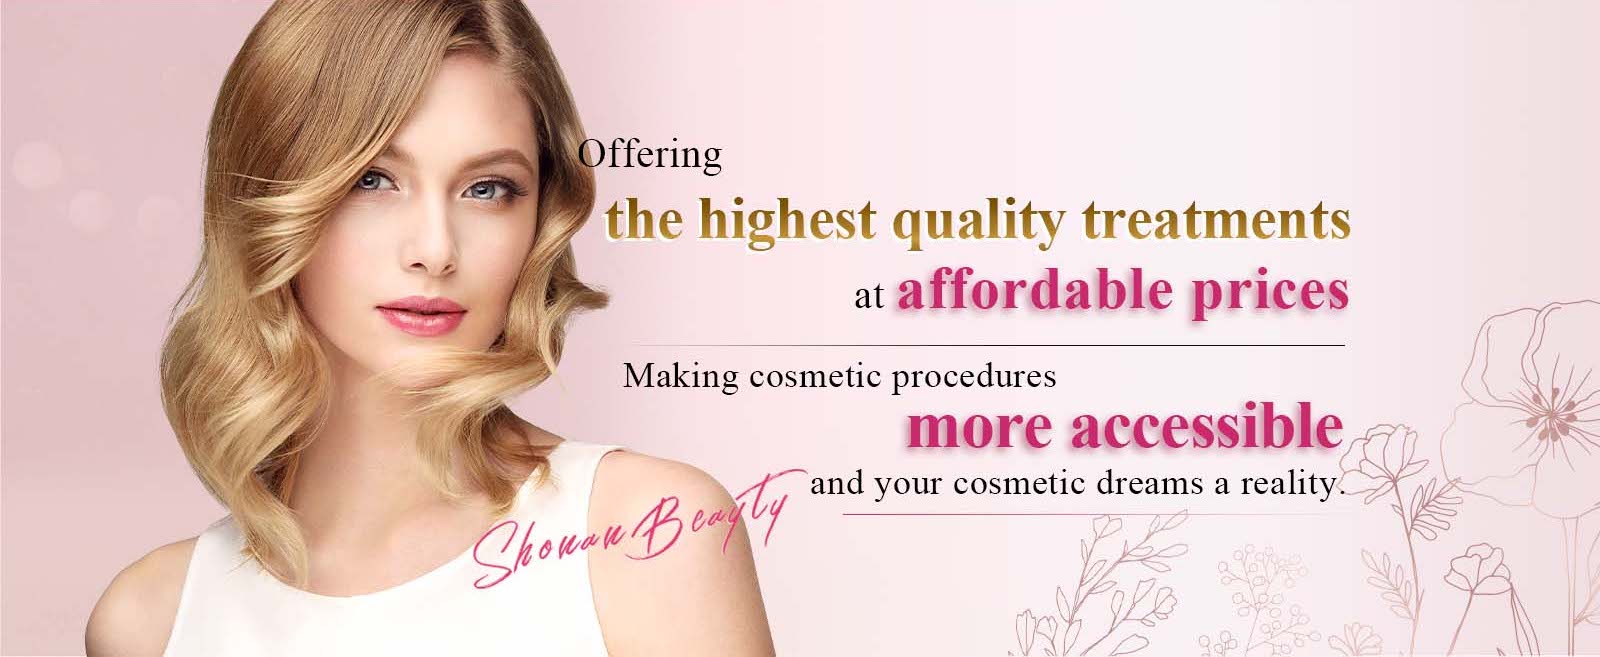 Offering the highest quality treatments at affordable price.